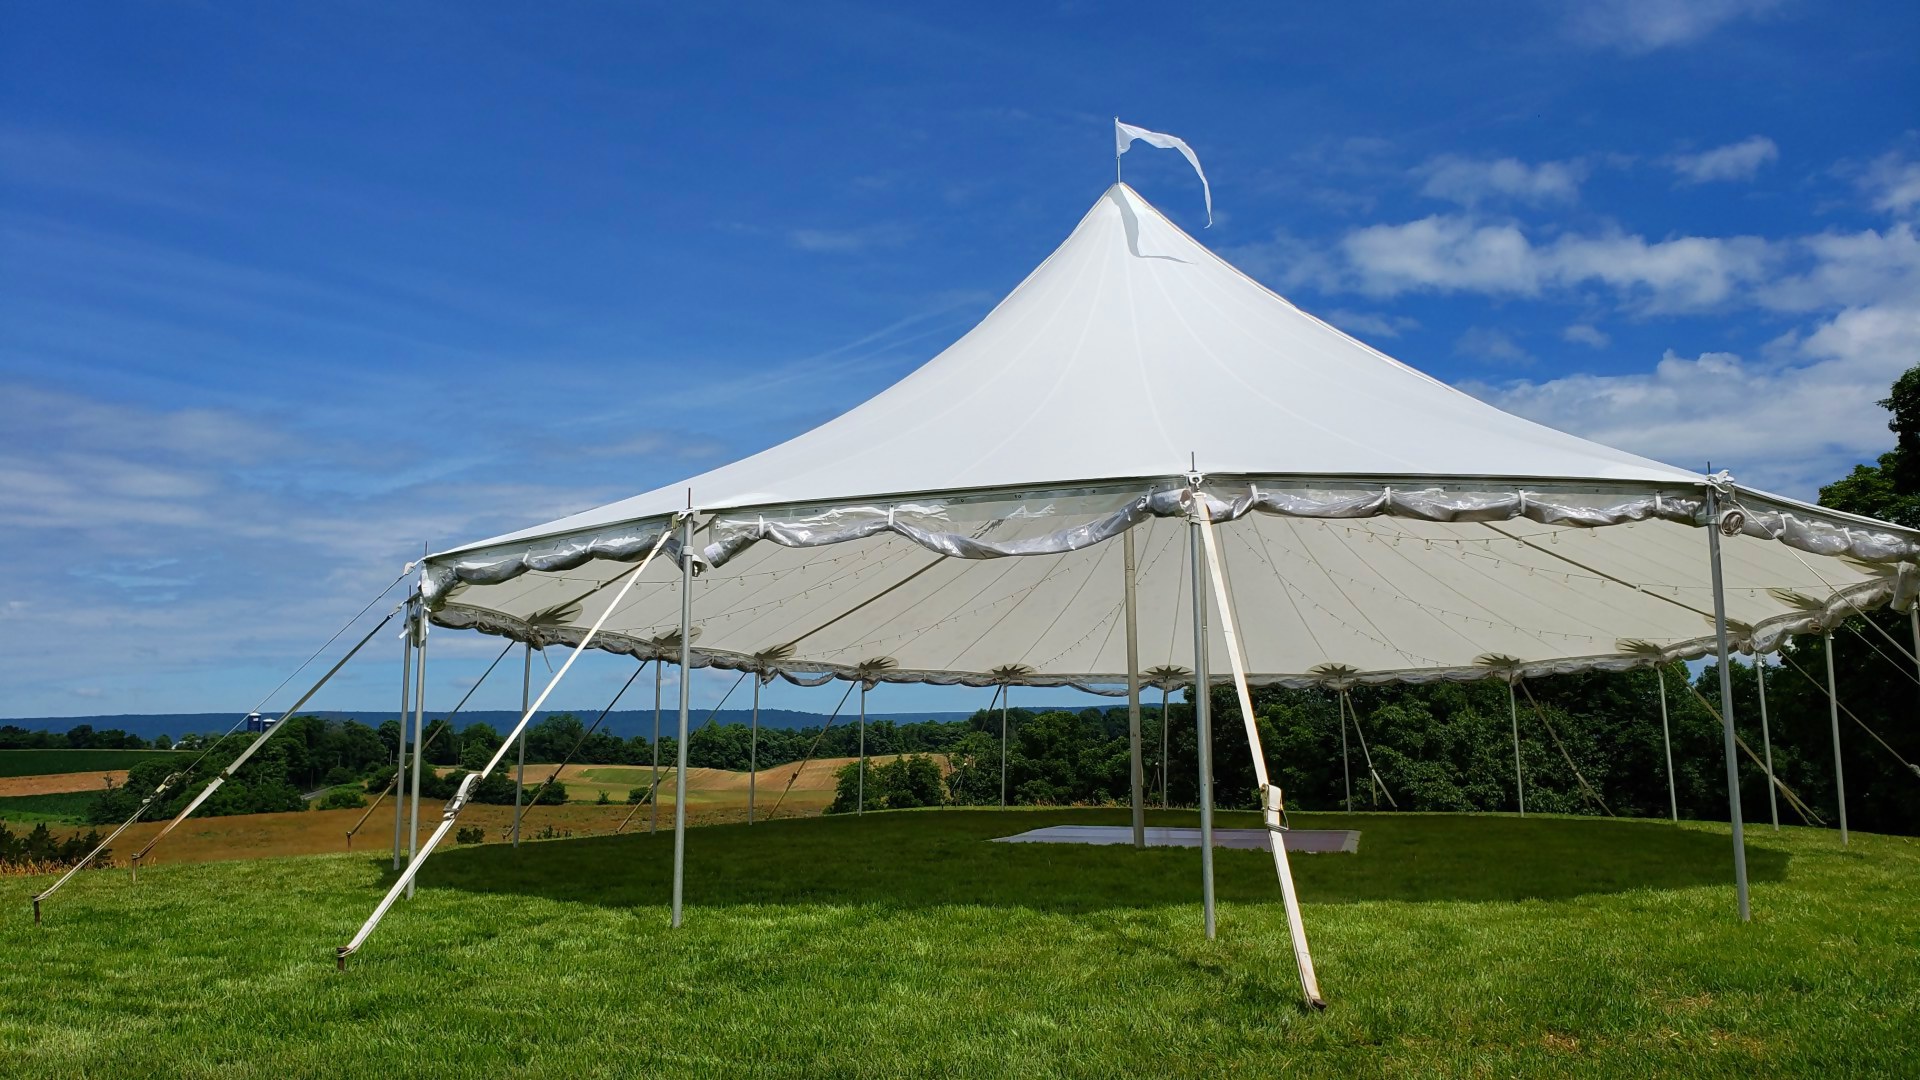 Beautiful Sailcloth tent in Pittsburgh, PA